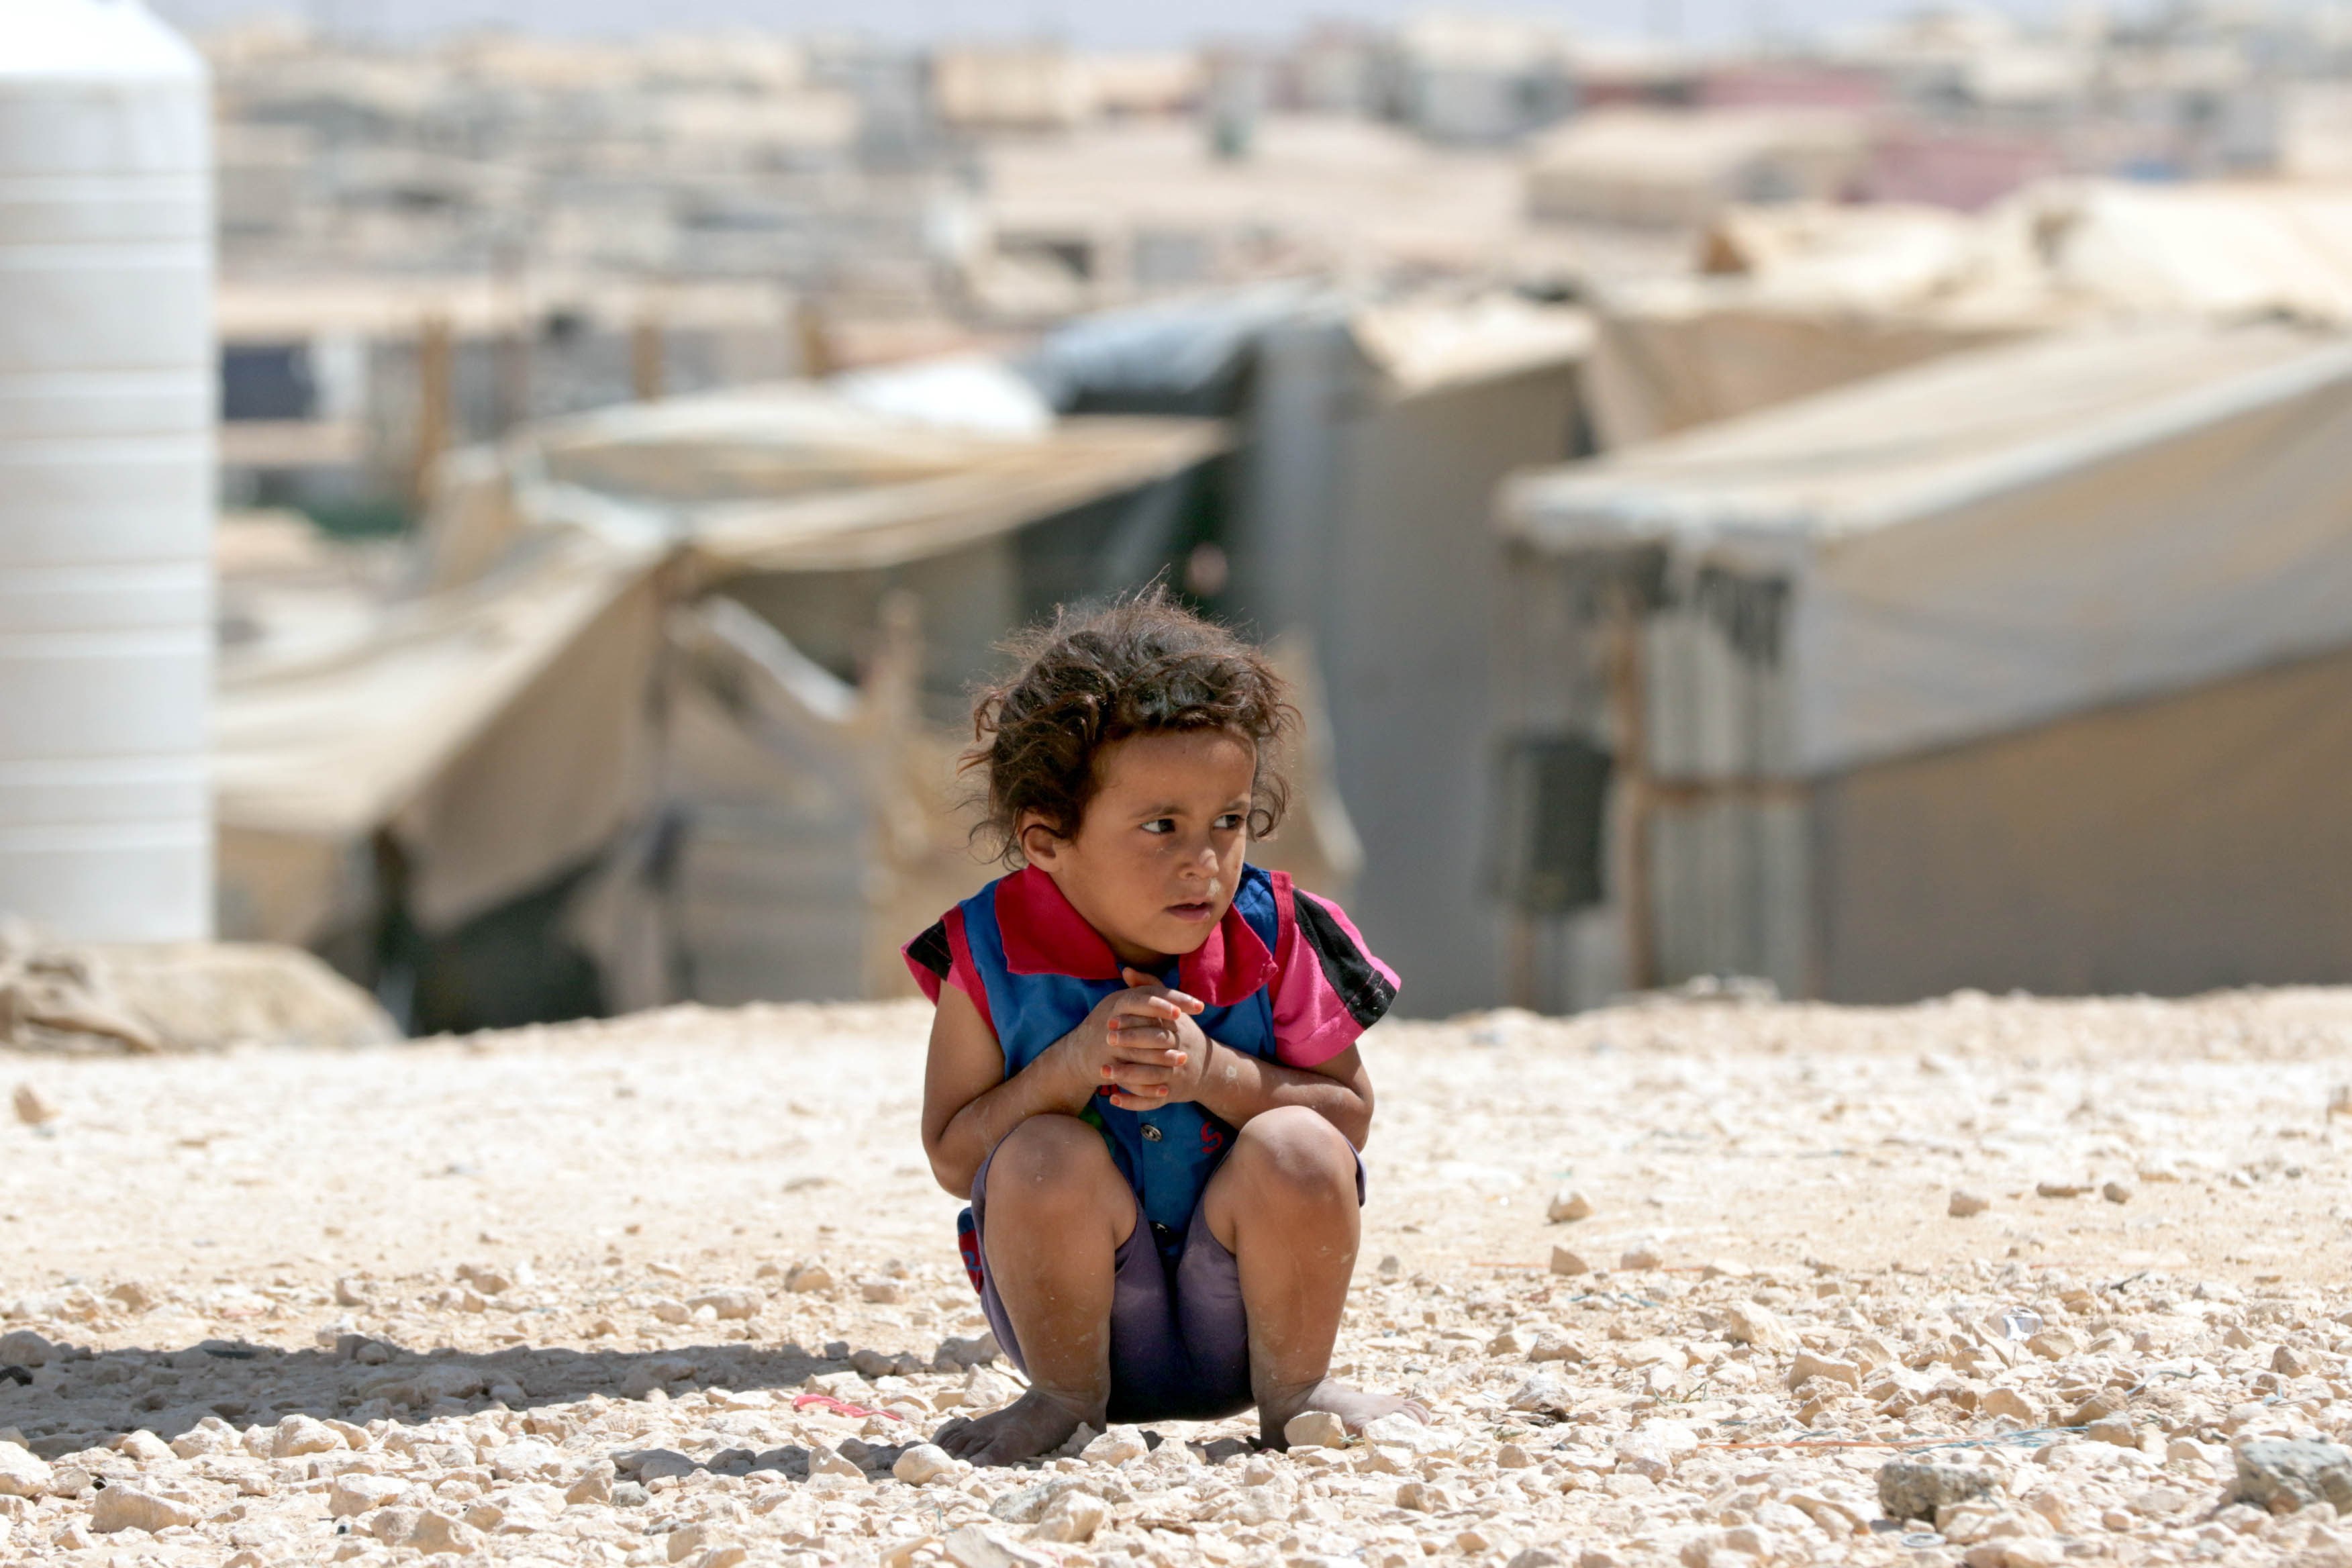 A young Syrian refugee looks on at the UN-run Zaatari camp, north east of the Jordanian capital Amman, on Sept. 19, 2015.